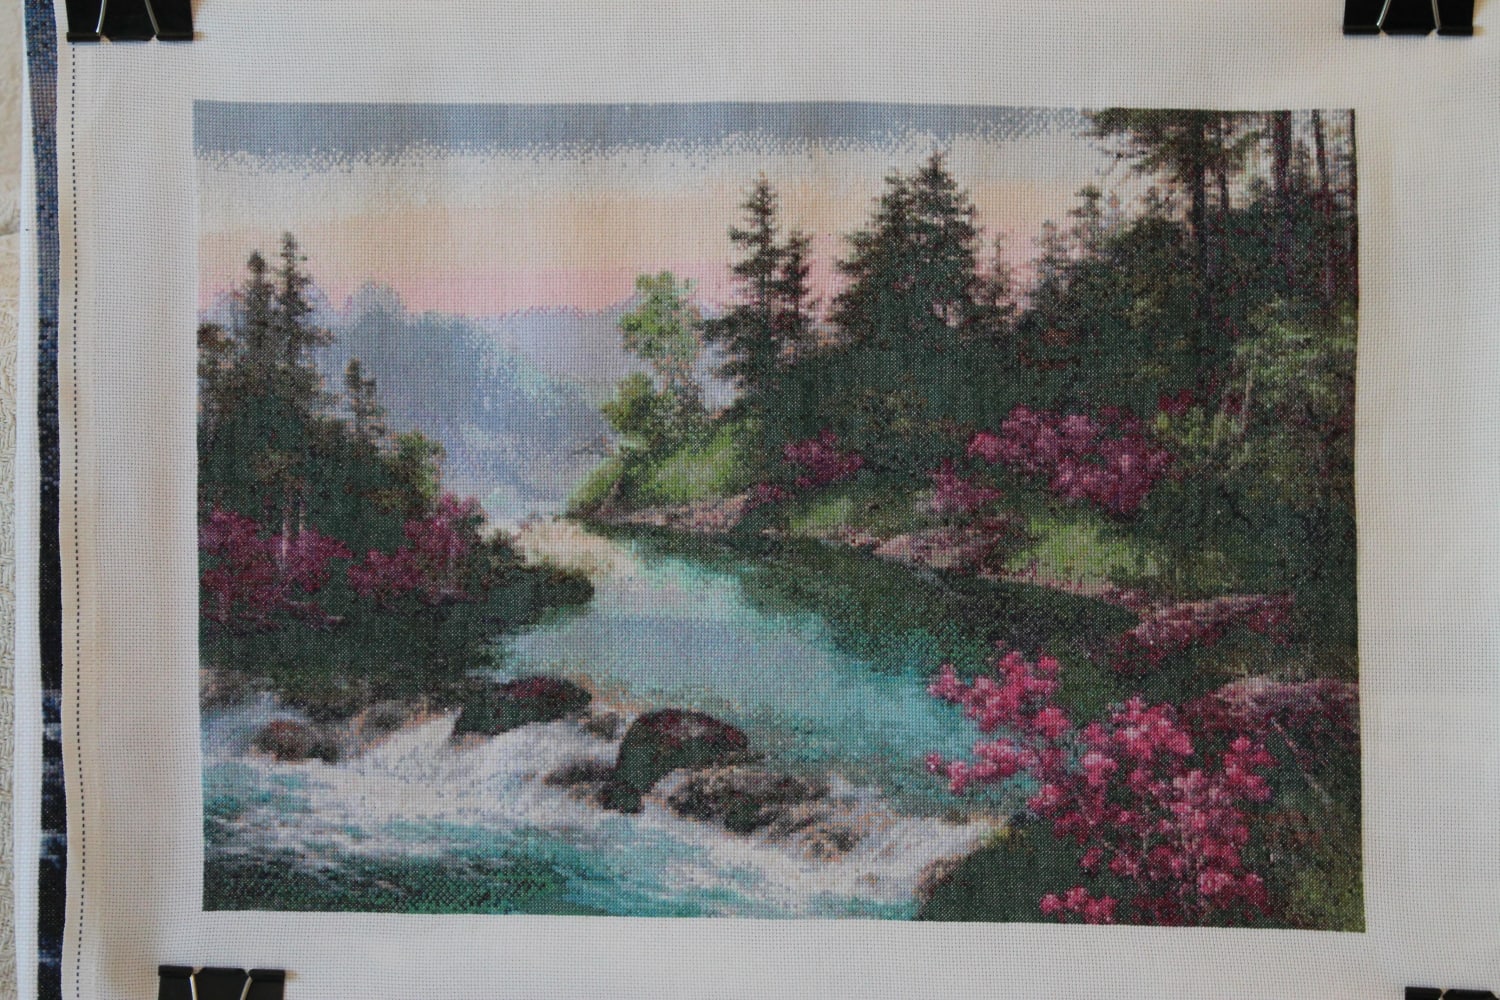 [FO] Finished cross stitch took a period of 9 months, 41 colors flosses, 74229 stitches done over. Pattern is self drafted